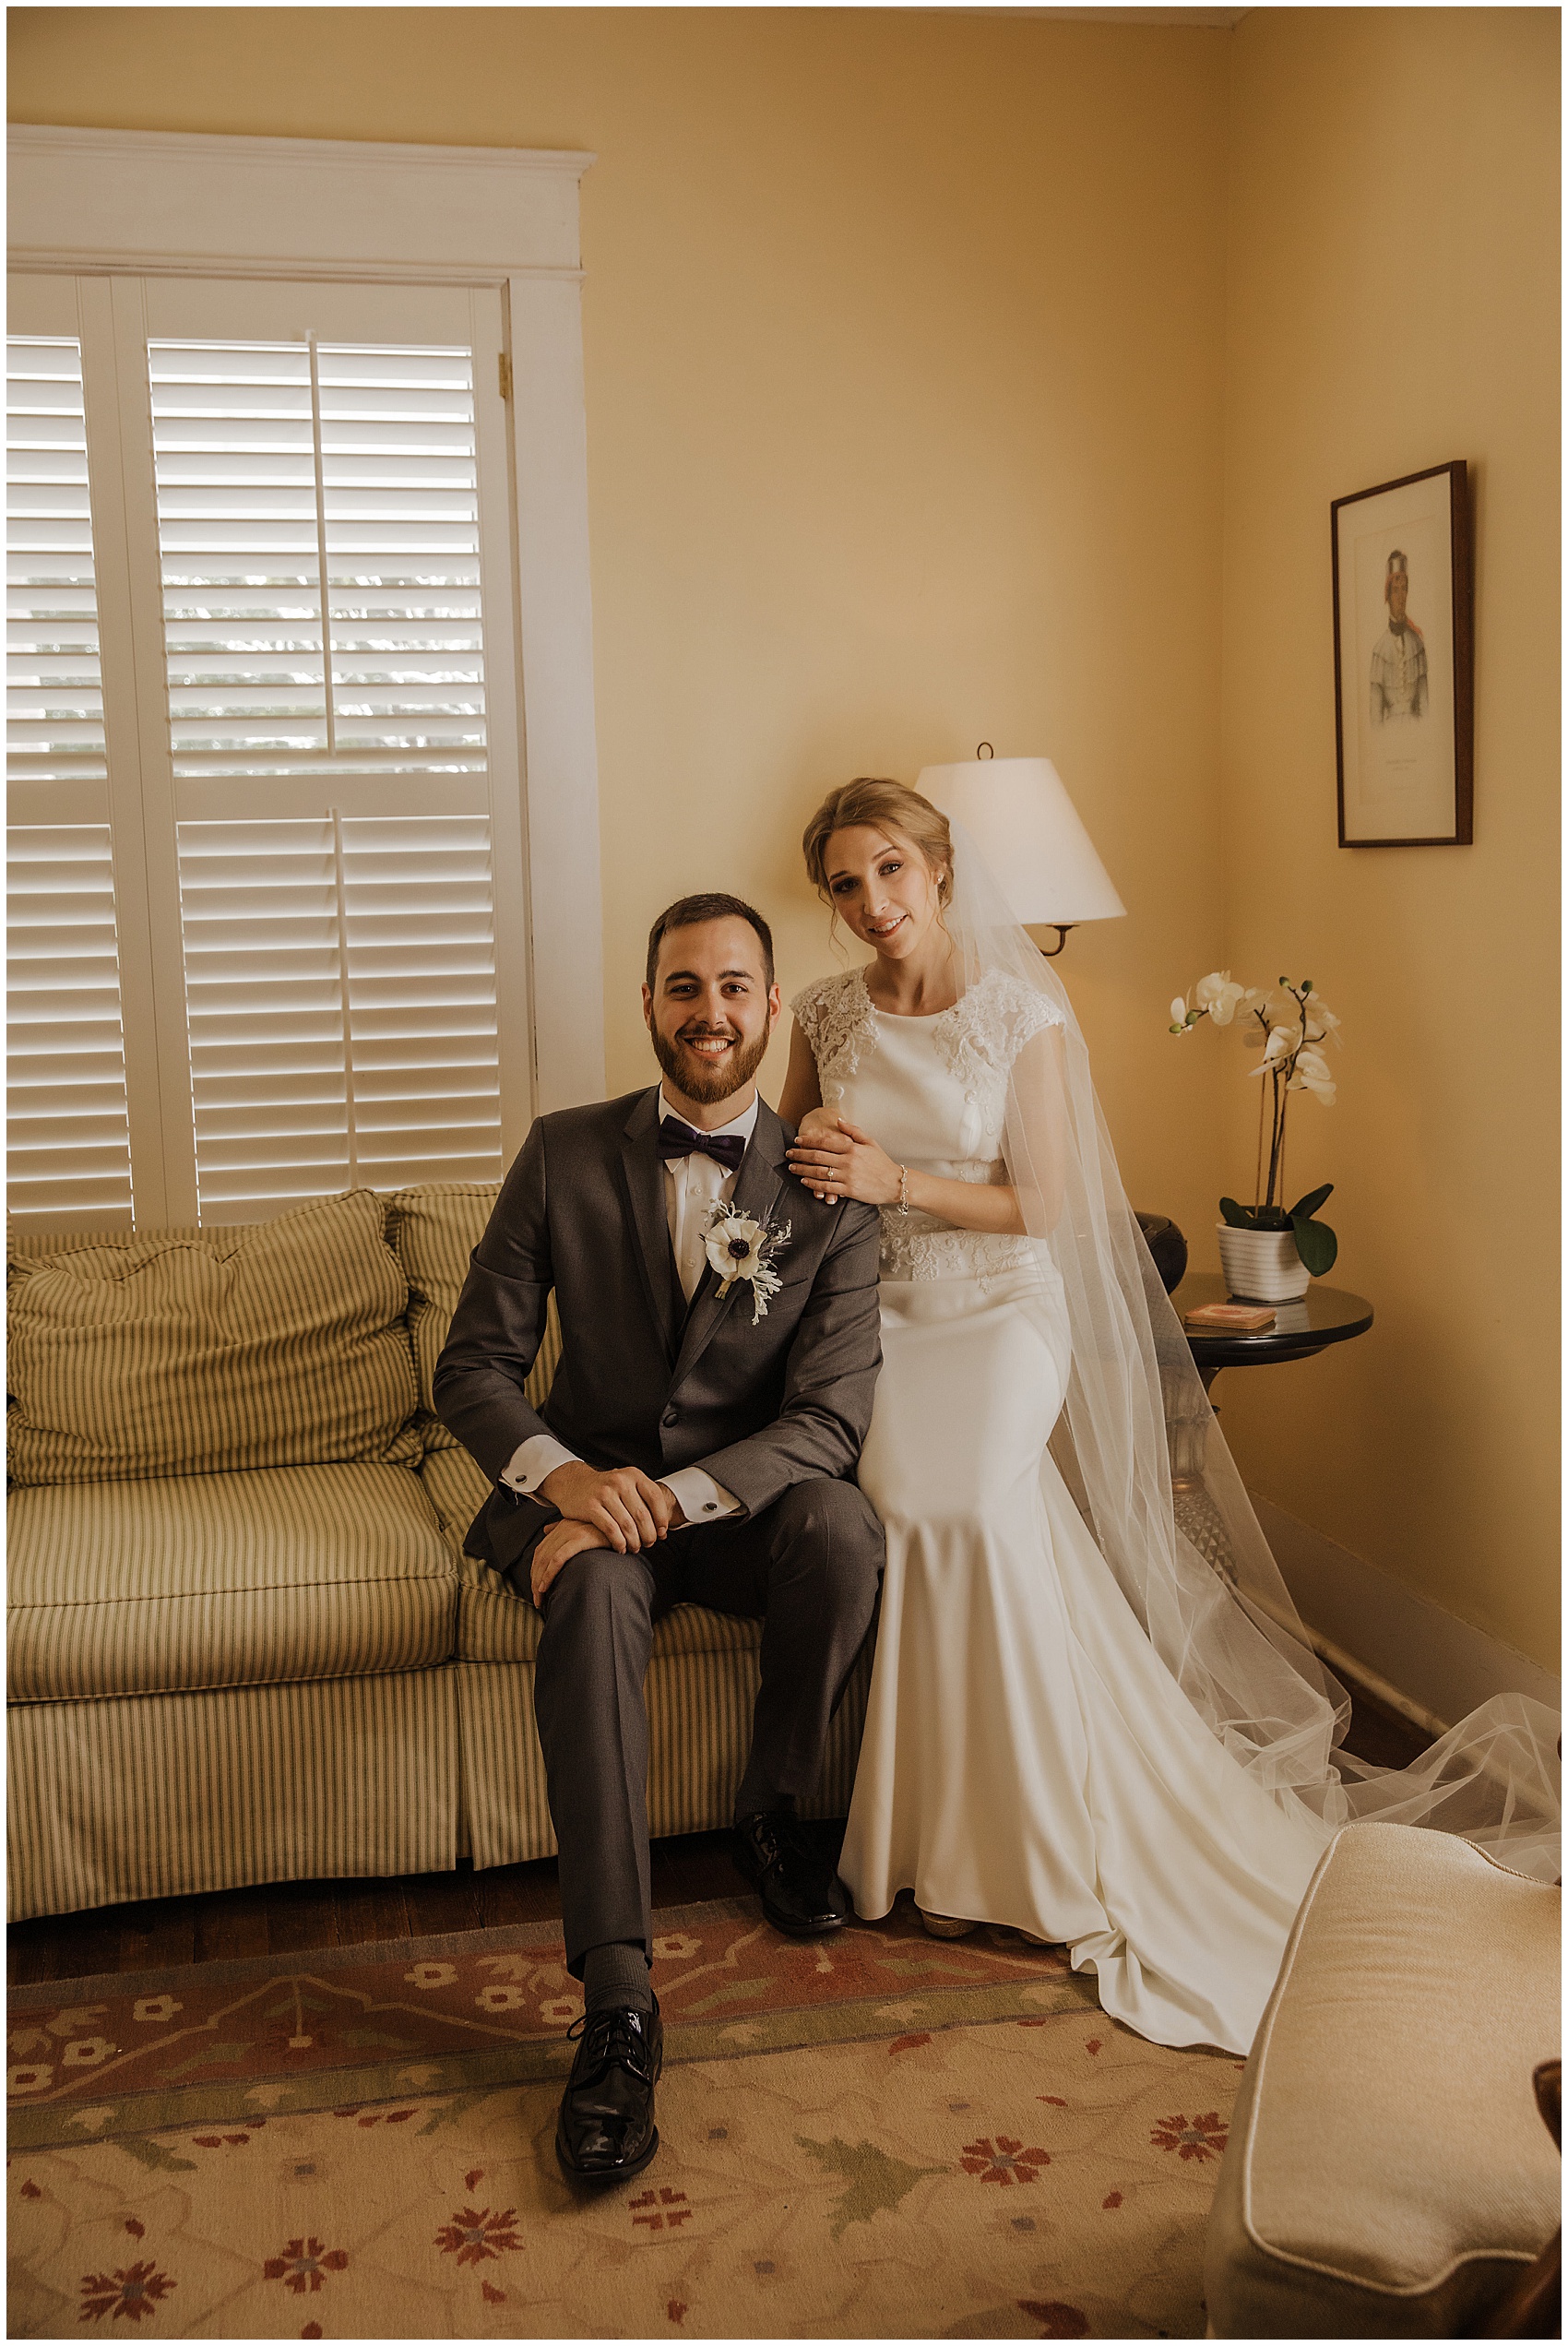 Newlywed sit together on an antique couch in the bridal suite